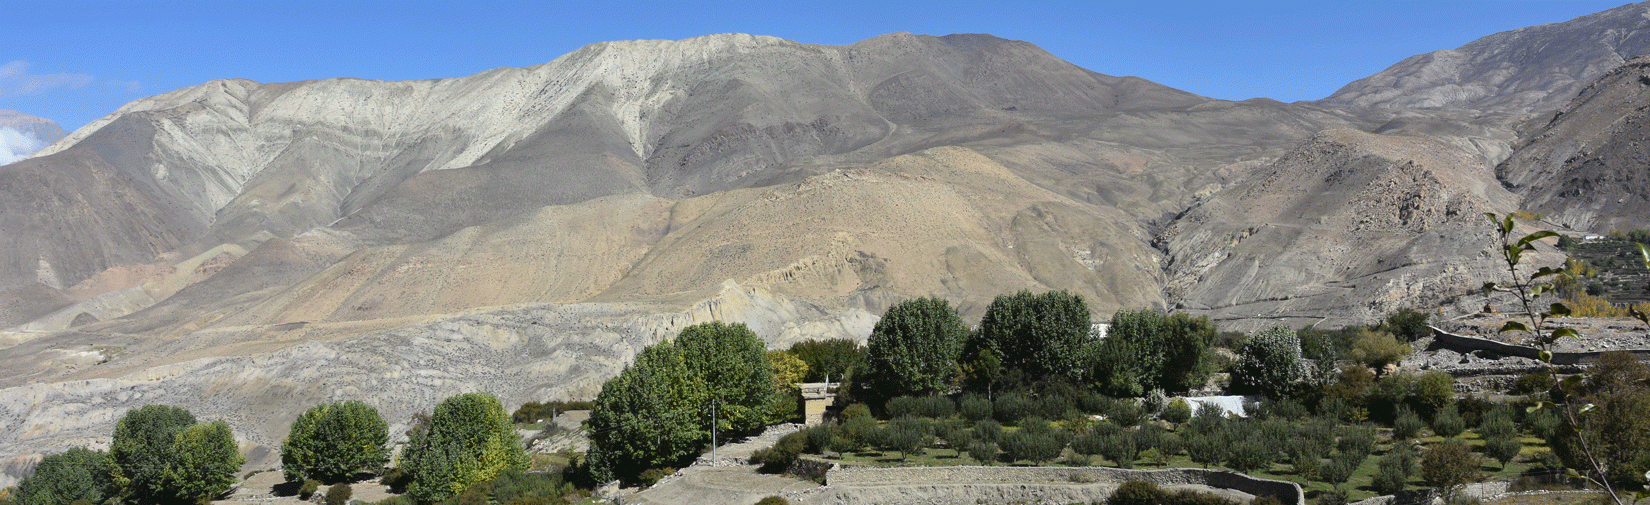 contrast-of-green-and-grey-vegetation-against-desert-mountain-in-mustang